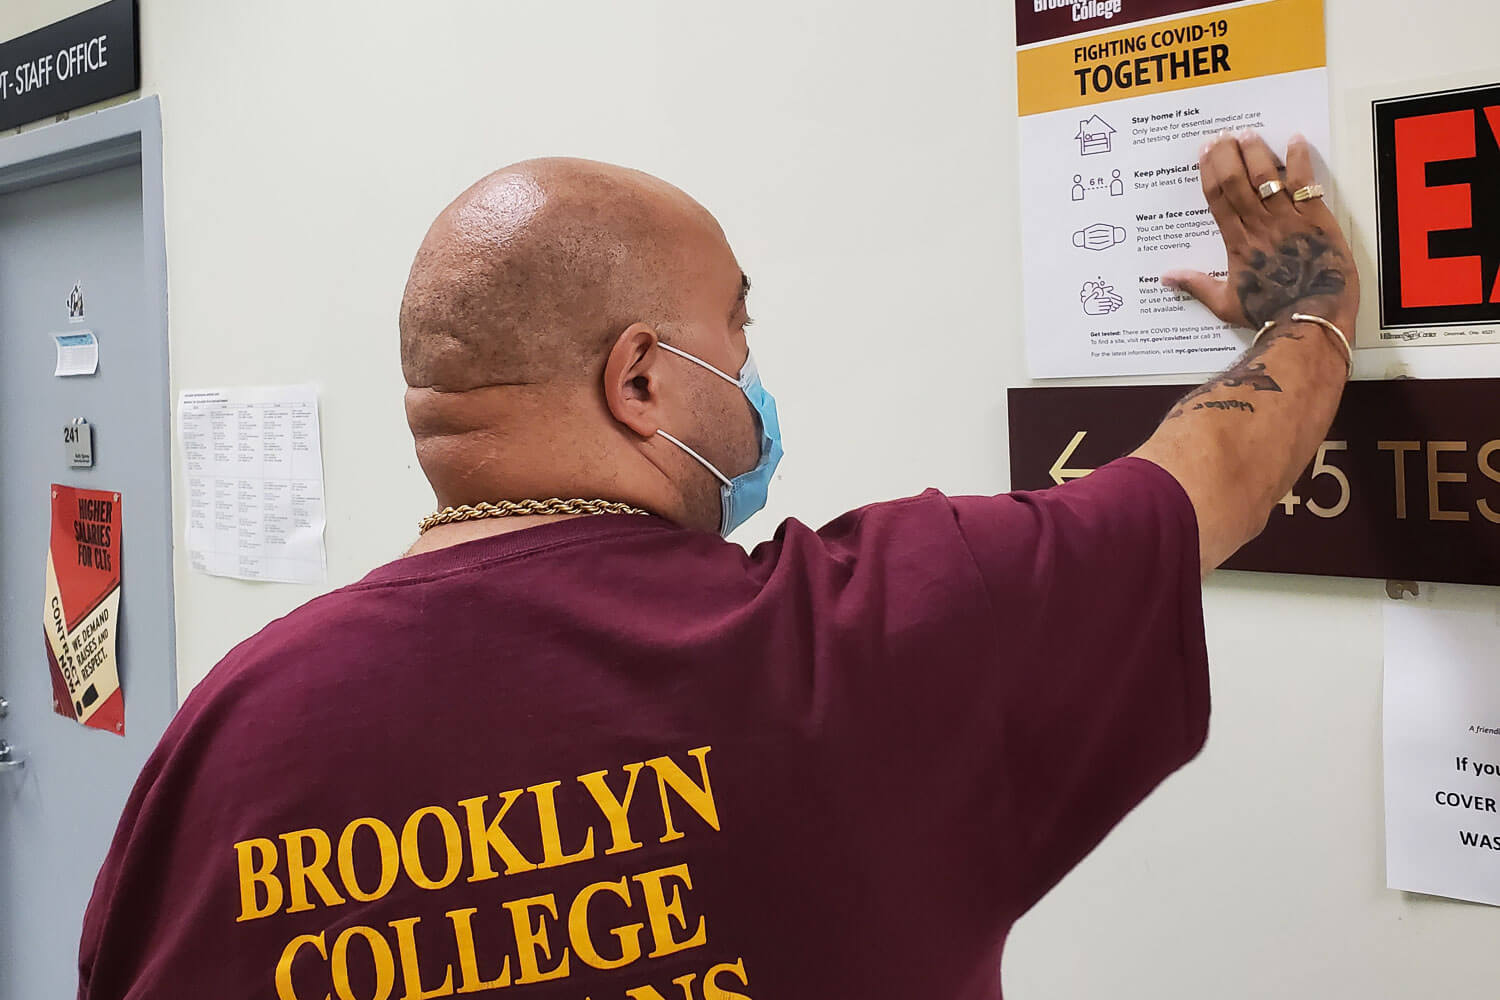 New signage, advising campus visitors of COVID best practices, was placed across buildings and hallways recently. Jerome was spotted with installing the Coronavirus basics chart: Stay Home; Keep Socially Distant; Wear a Mask; Keep Your Hands Clean.